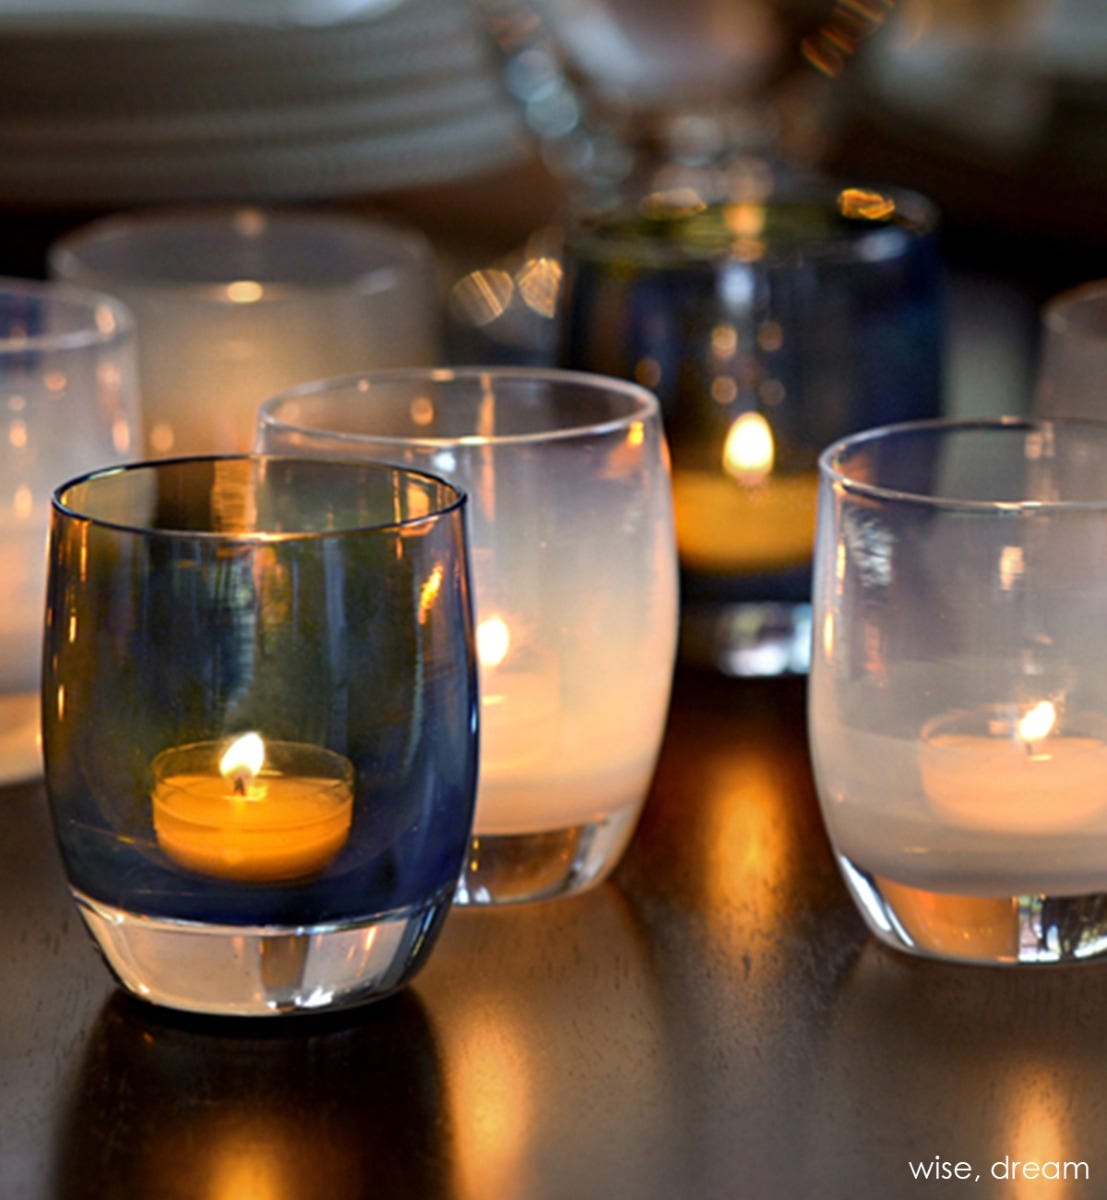 wise translucent deep gray with wisps of purple and yellow hand-blown glass votive candle holder. Paired with dream.